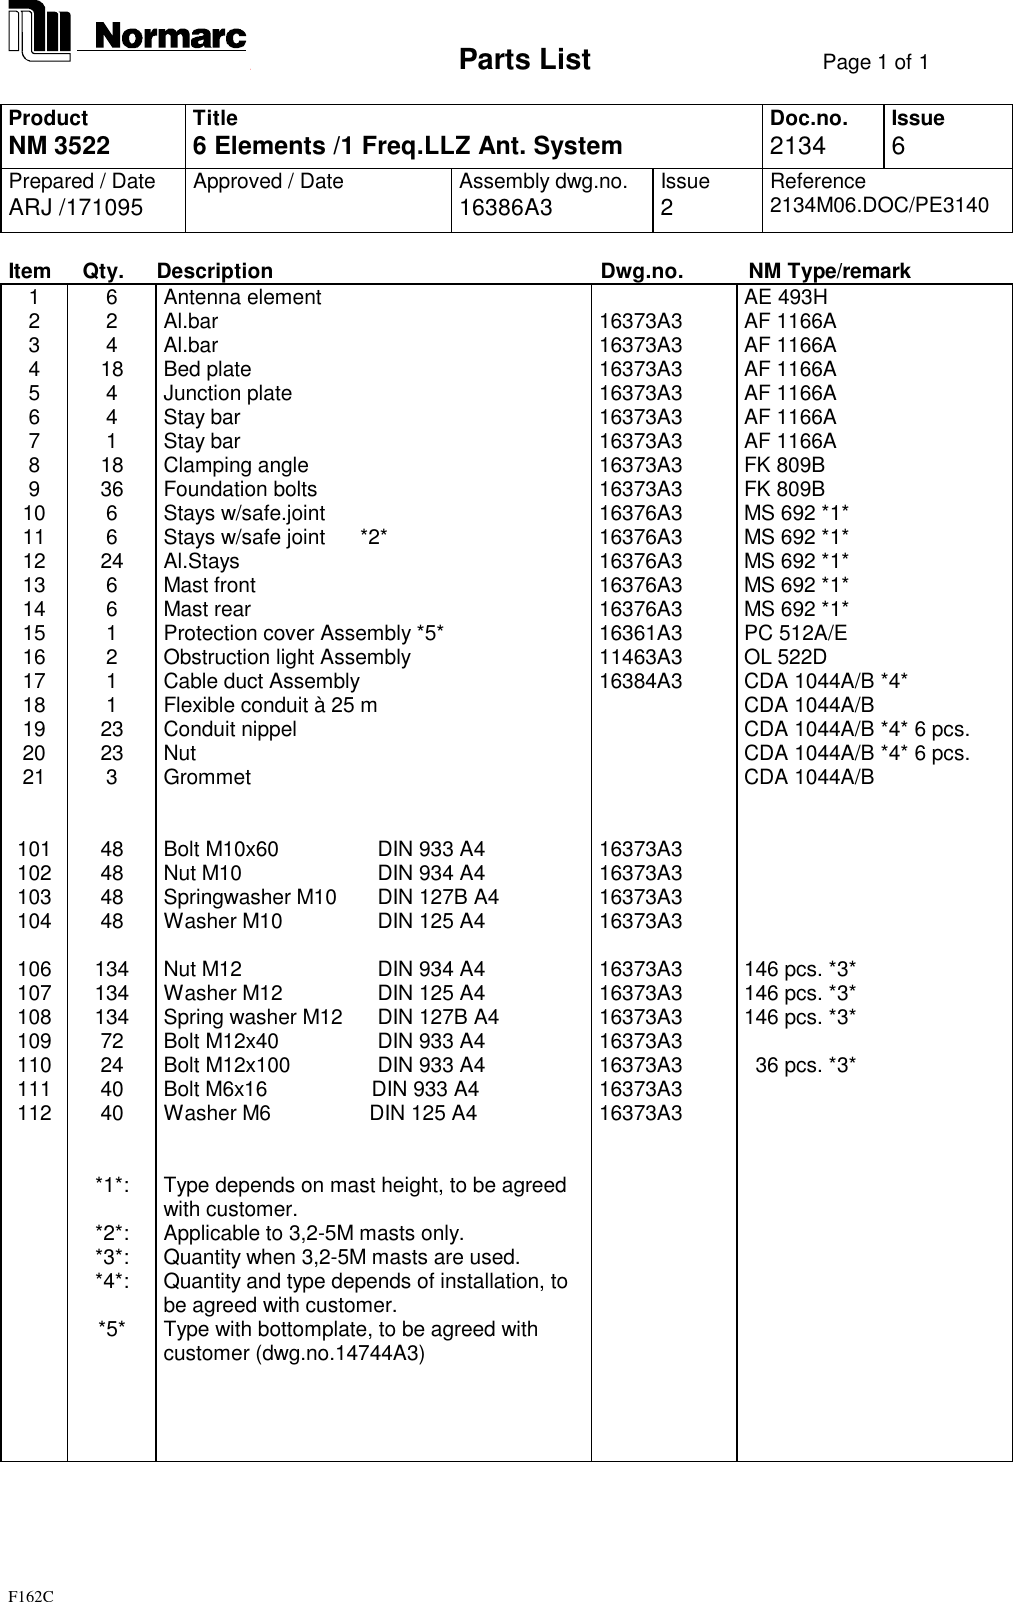                             Parts List Page 1 of 1F162CProductNM 3522 Title6 Elements /1 Freq.LLZ Ant. System Doc.no.2134 Issue6Prepared / DateARJ /171095 Approved / Date Assembly dwg.no.16386A3 Issue2Reference2134M06.DOC/PE3140Item Qty. Description Dwg.no. NM Type/remark1 6 Antenna element AE 493H2 2 Al.bar 16373A3 AF 1166A3 4 Al.bar 16373A3 AF 1166A4 18 Bed plate 16373A3 AF 1166A5 4 Junction plate 16373A3 AF 1166A6 4 Stay bar 16373A3 AF 1166A7 1 Stay bar 16373A3 AF 1166A8 18 Clamping angle 16373A3 FK 809B9 36 Foundation bolts 16373A3 FK 809B10 6 Stays w/safe.joint 16376A3 MS 692 *1*11 6 Stays w/safe joint      *2* 16376A3 MS 692 *1*12 24 Al.Stays 16376A3 MS 692 *1*13 6 Mast front 16376A3 MS 692 *1*14 6 Mast rear 16376A3 MS 692 *1*15 1 Protection cover Assembly *5* 16361A3 PC 512A/E16 2 Obstruction light Assembly 11463A3 OL 522D17 1 Cable duct Assembly 16384A3 CDA 1044A/B *4*18 1 Flexible conduit à 25 m CDA 1044A/B19 23 Conduit nippel CDA 1044A/B *4* 6 pcs.20 23 Nut CDA 1044A/B *4* 6 pcs.21 3 Grommet CDA 1044A/B101 48 Bolt M10x60     DIN 933 A4 16373A3102 48 Nut M10         DIN 934 A4 16373A3103 48 Springwasher M10    DIN 127B A4 16373A3104 48 Washer M10     DIN 125 A4 16373A3106 134 Nut M12          DIN 934 A4 16373A3 146 pcs. *3*107 134 Washer M12      DIN 125 A4 16373A3 146 pcs. *3*108 134 Spring washer M12   DIN 127B A4 16373A3 146 pcs. *3*109 72 Bolt M12x40       DIN 933 A4 16373A3110 24 Bolt M12x100     DIN 933 A4 16373A3   36 pcs. *3*111 40 Bolt M6x16                  DIN 933 A4 16373A3112 40 Washer M6                 DIN 125 A4 16373A3*1*: Type depends on mast height, to be agreedwith customer.*2*: Applicable to 3,2-5M masts only.*3*: Quantity when 3,2-5M masts are used.*4*: Quantity and type depends of installation, tobe agreed with customer.*5* Type with bottomplate, to be agreed withcustomer (dwg.no.14744A3)